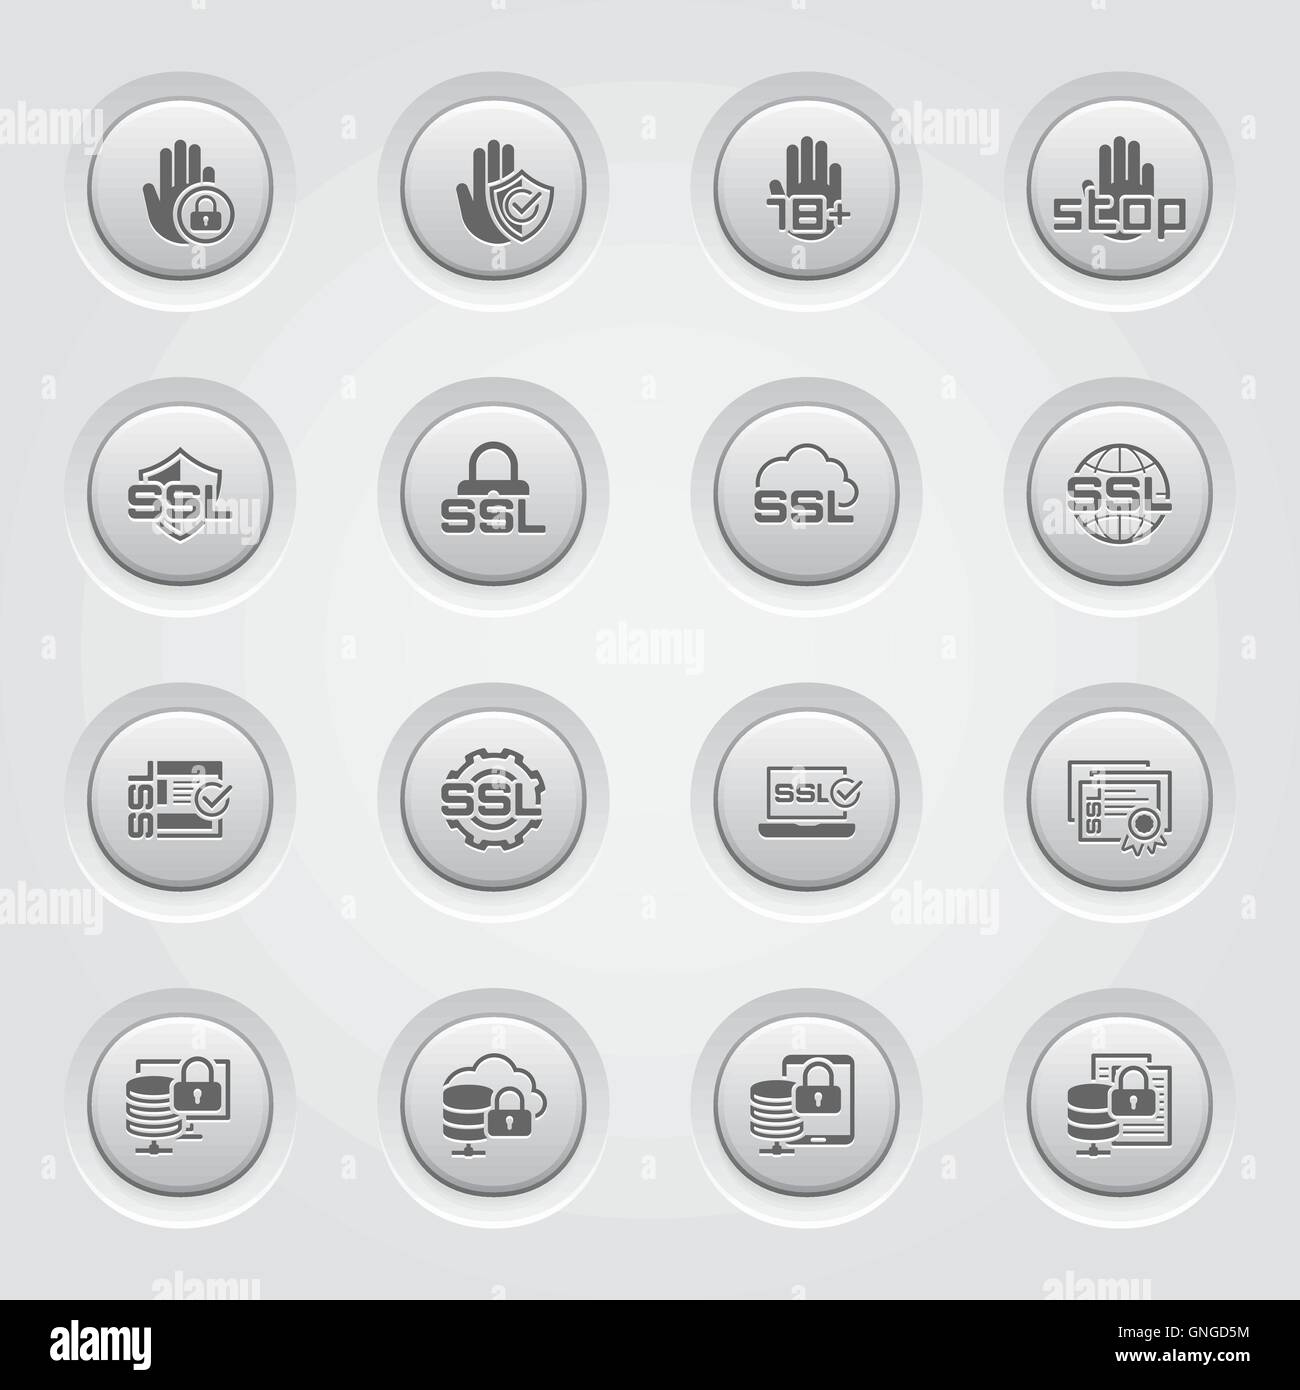 Button Design Security and Protection Icons Set. Stock Vector